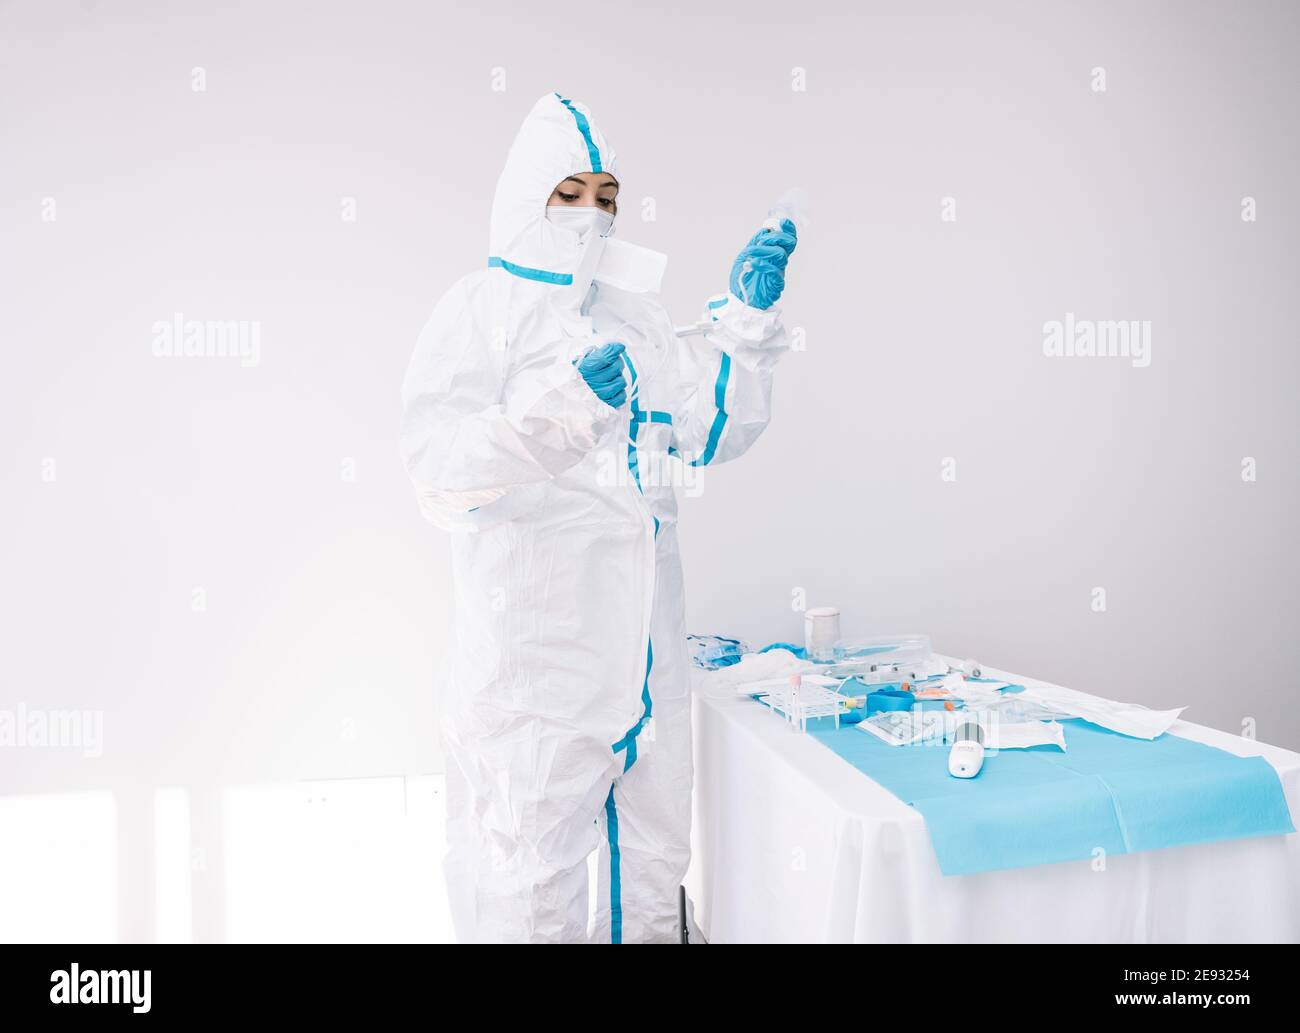 Doctor in medical mask and protective costume standing in hospital and using dropper while working during COVID outbreak Stock Photo